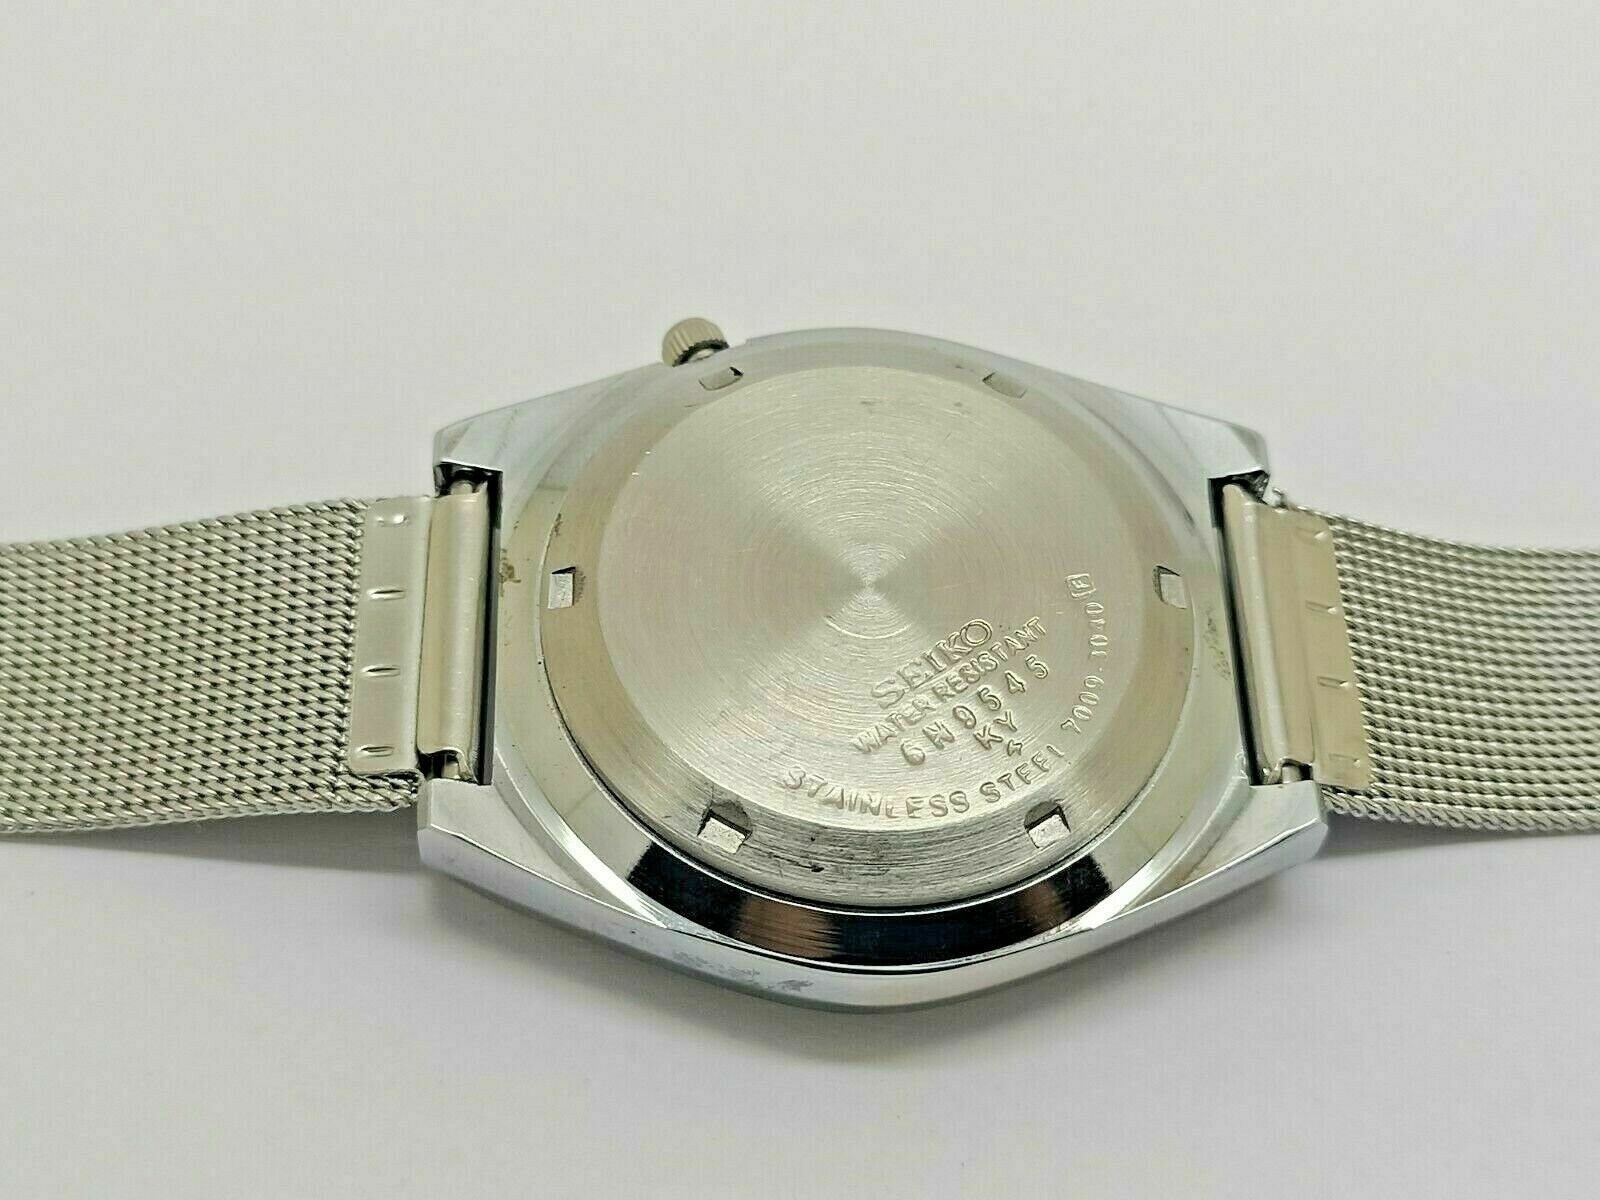 Seiko 5 Automatic Japan Made White Dial Vintage Watch Day - Etsy